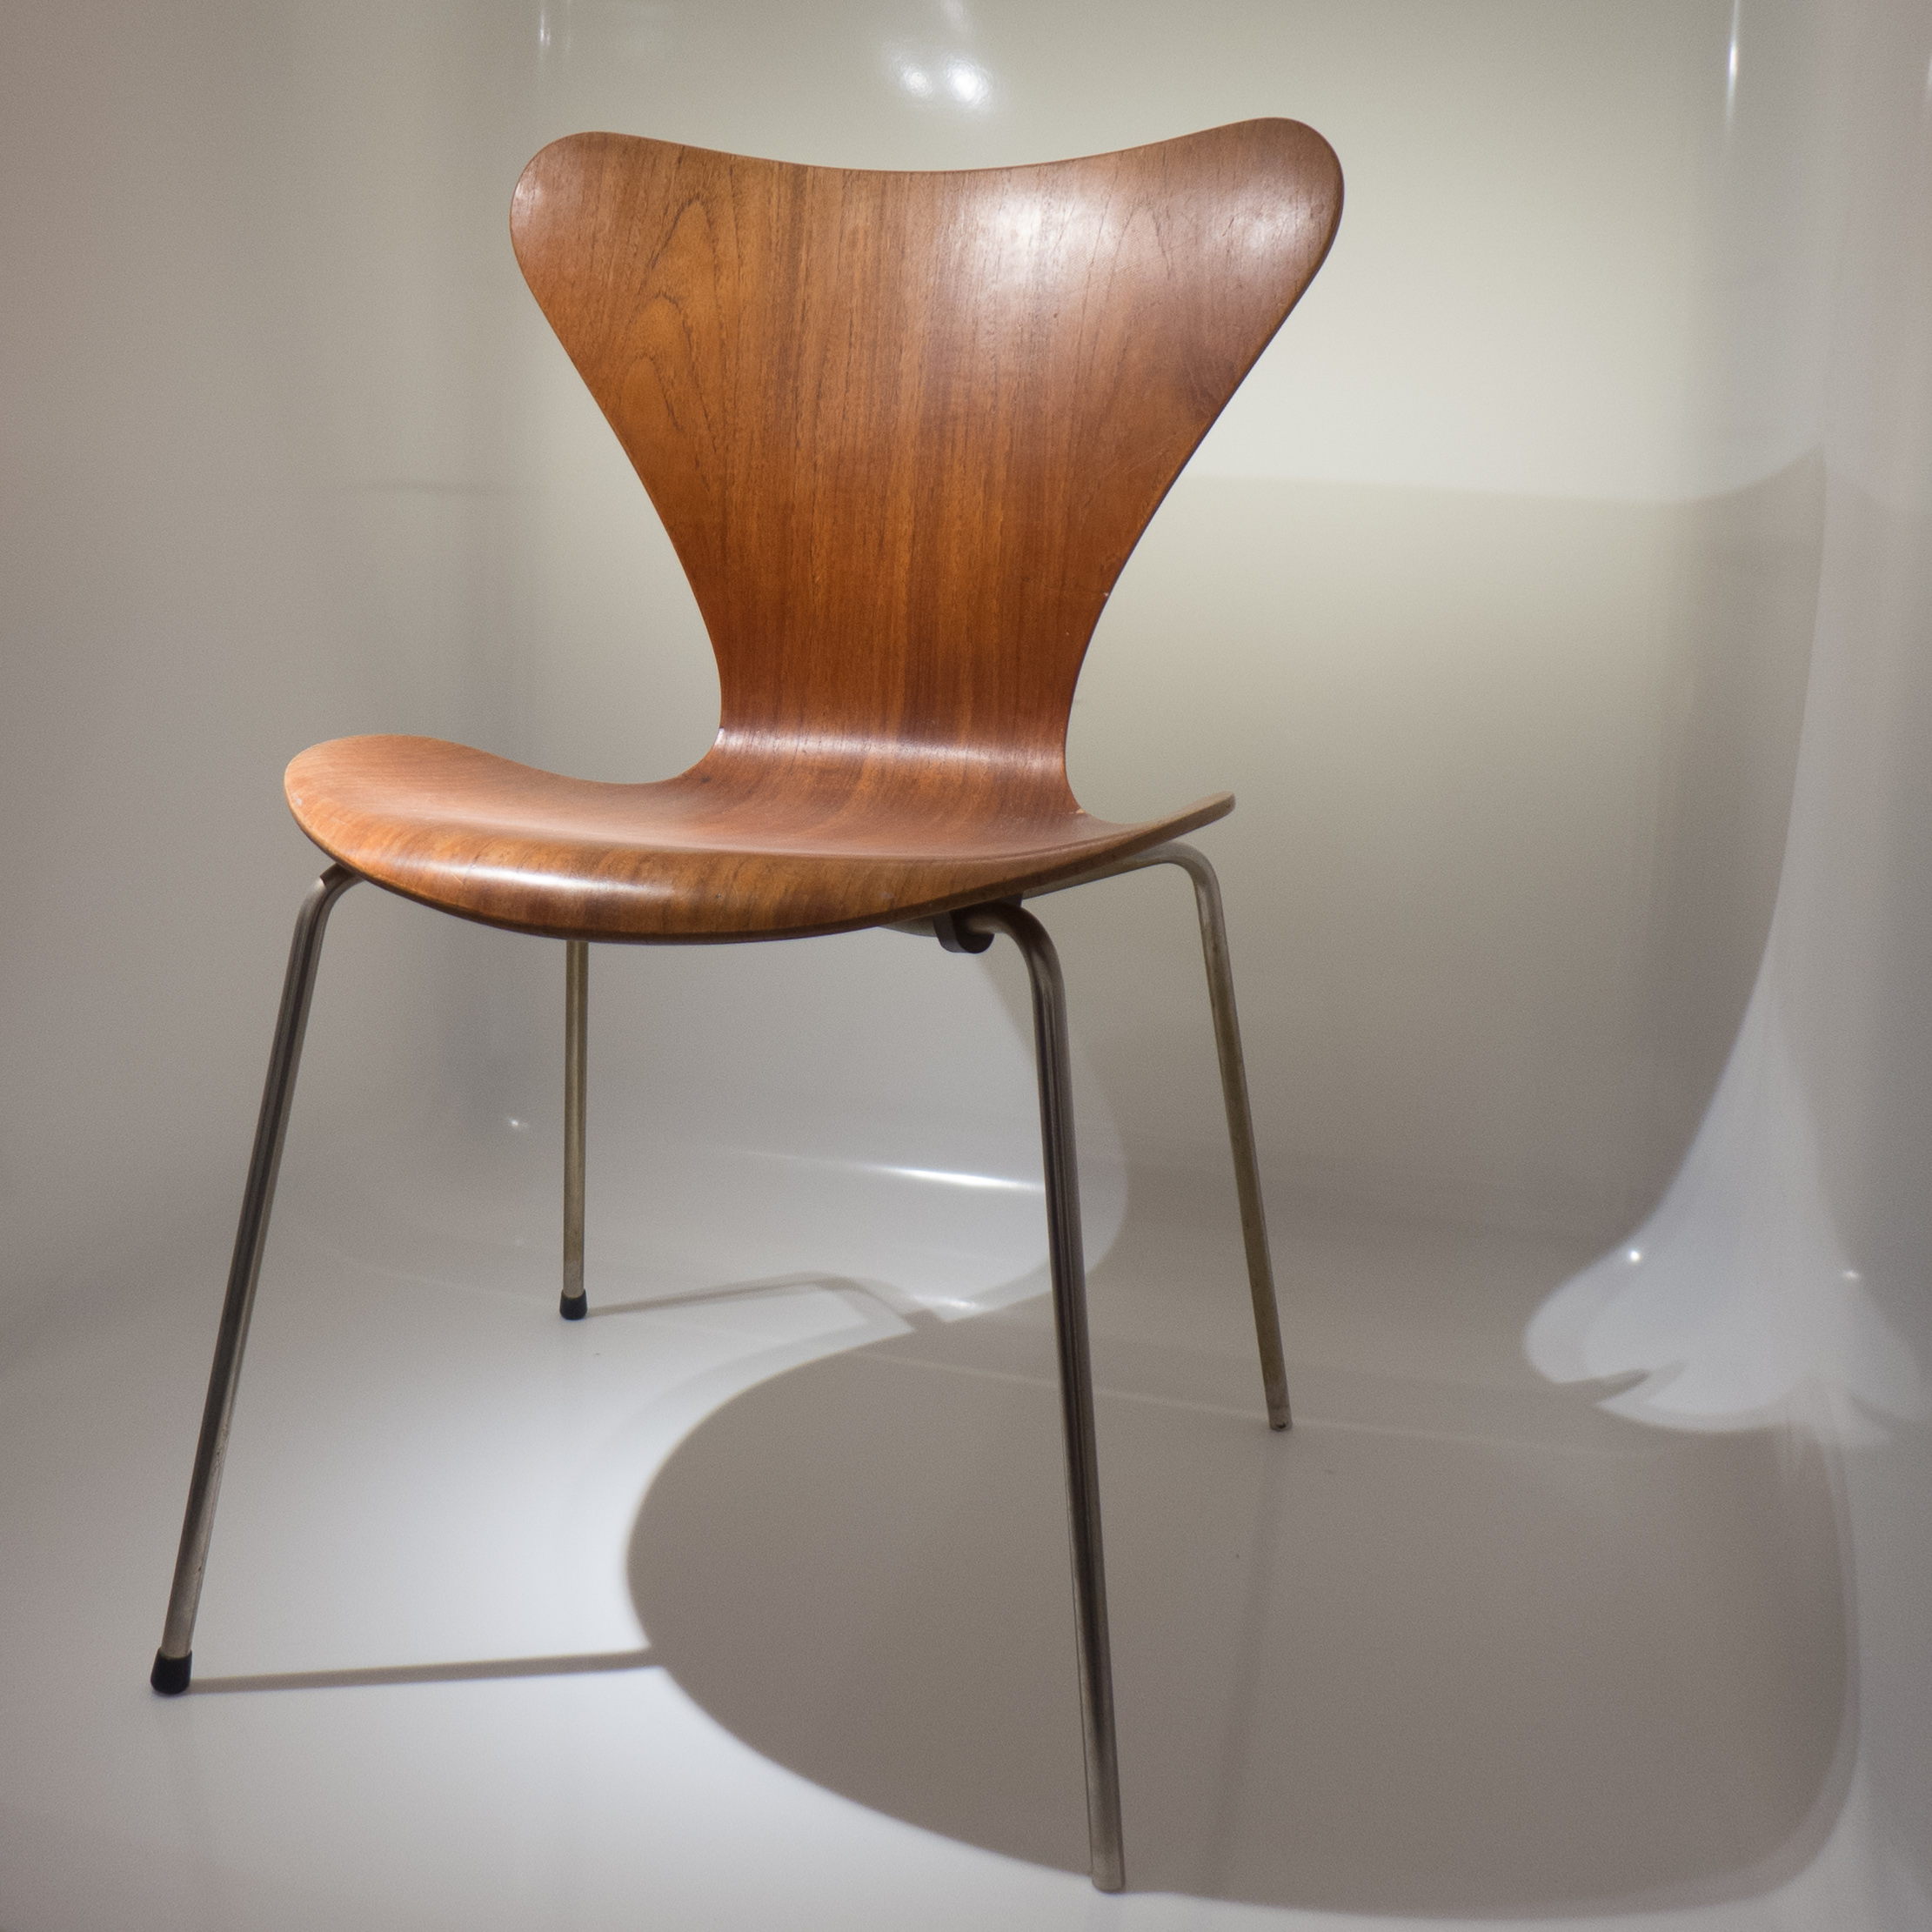 1955_Serie 7 swing by Arne Jacobsen for Louis Vuitton